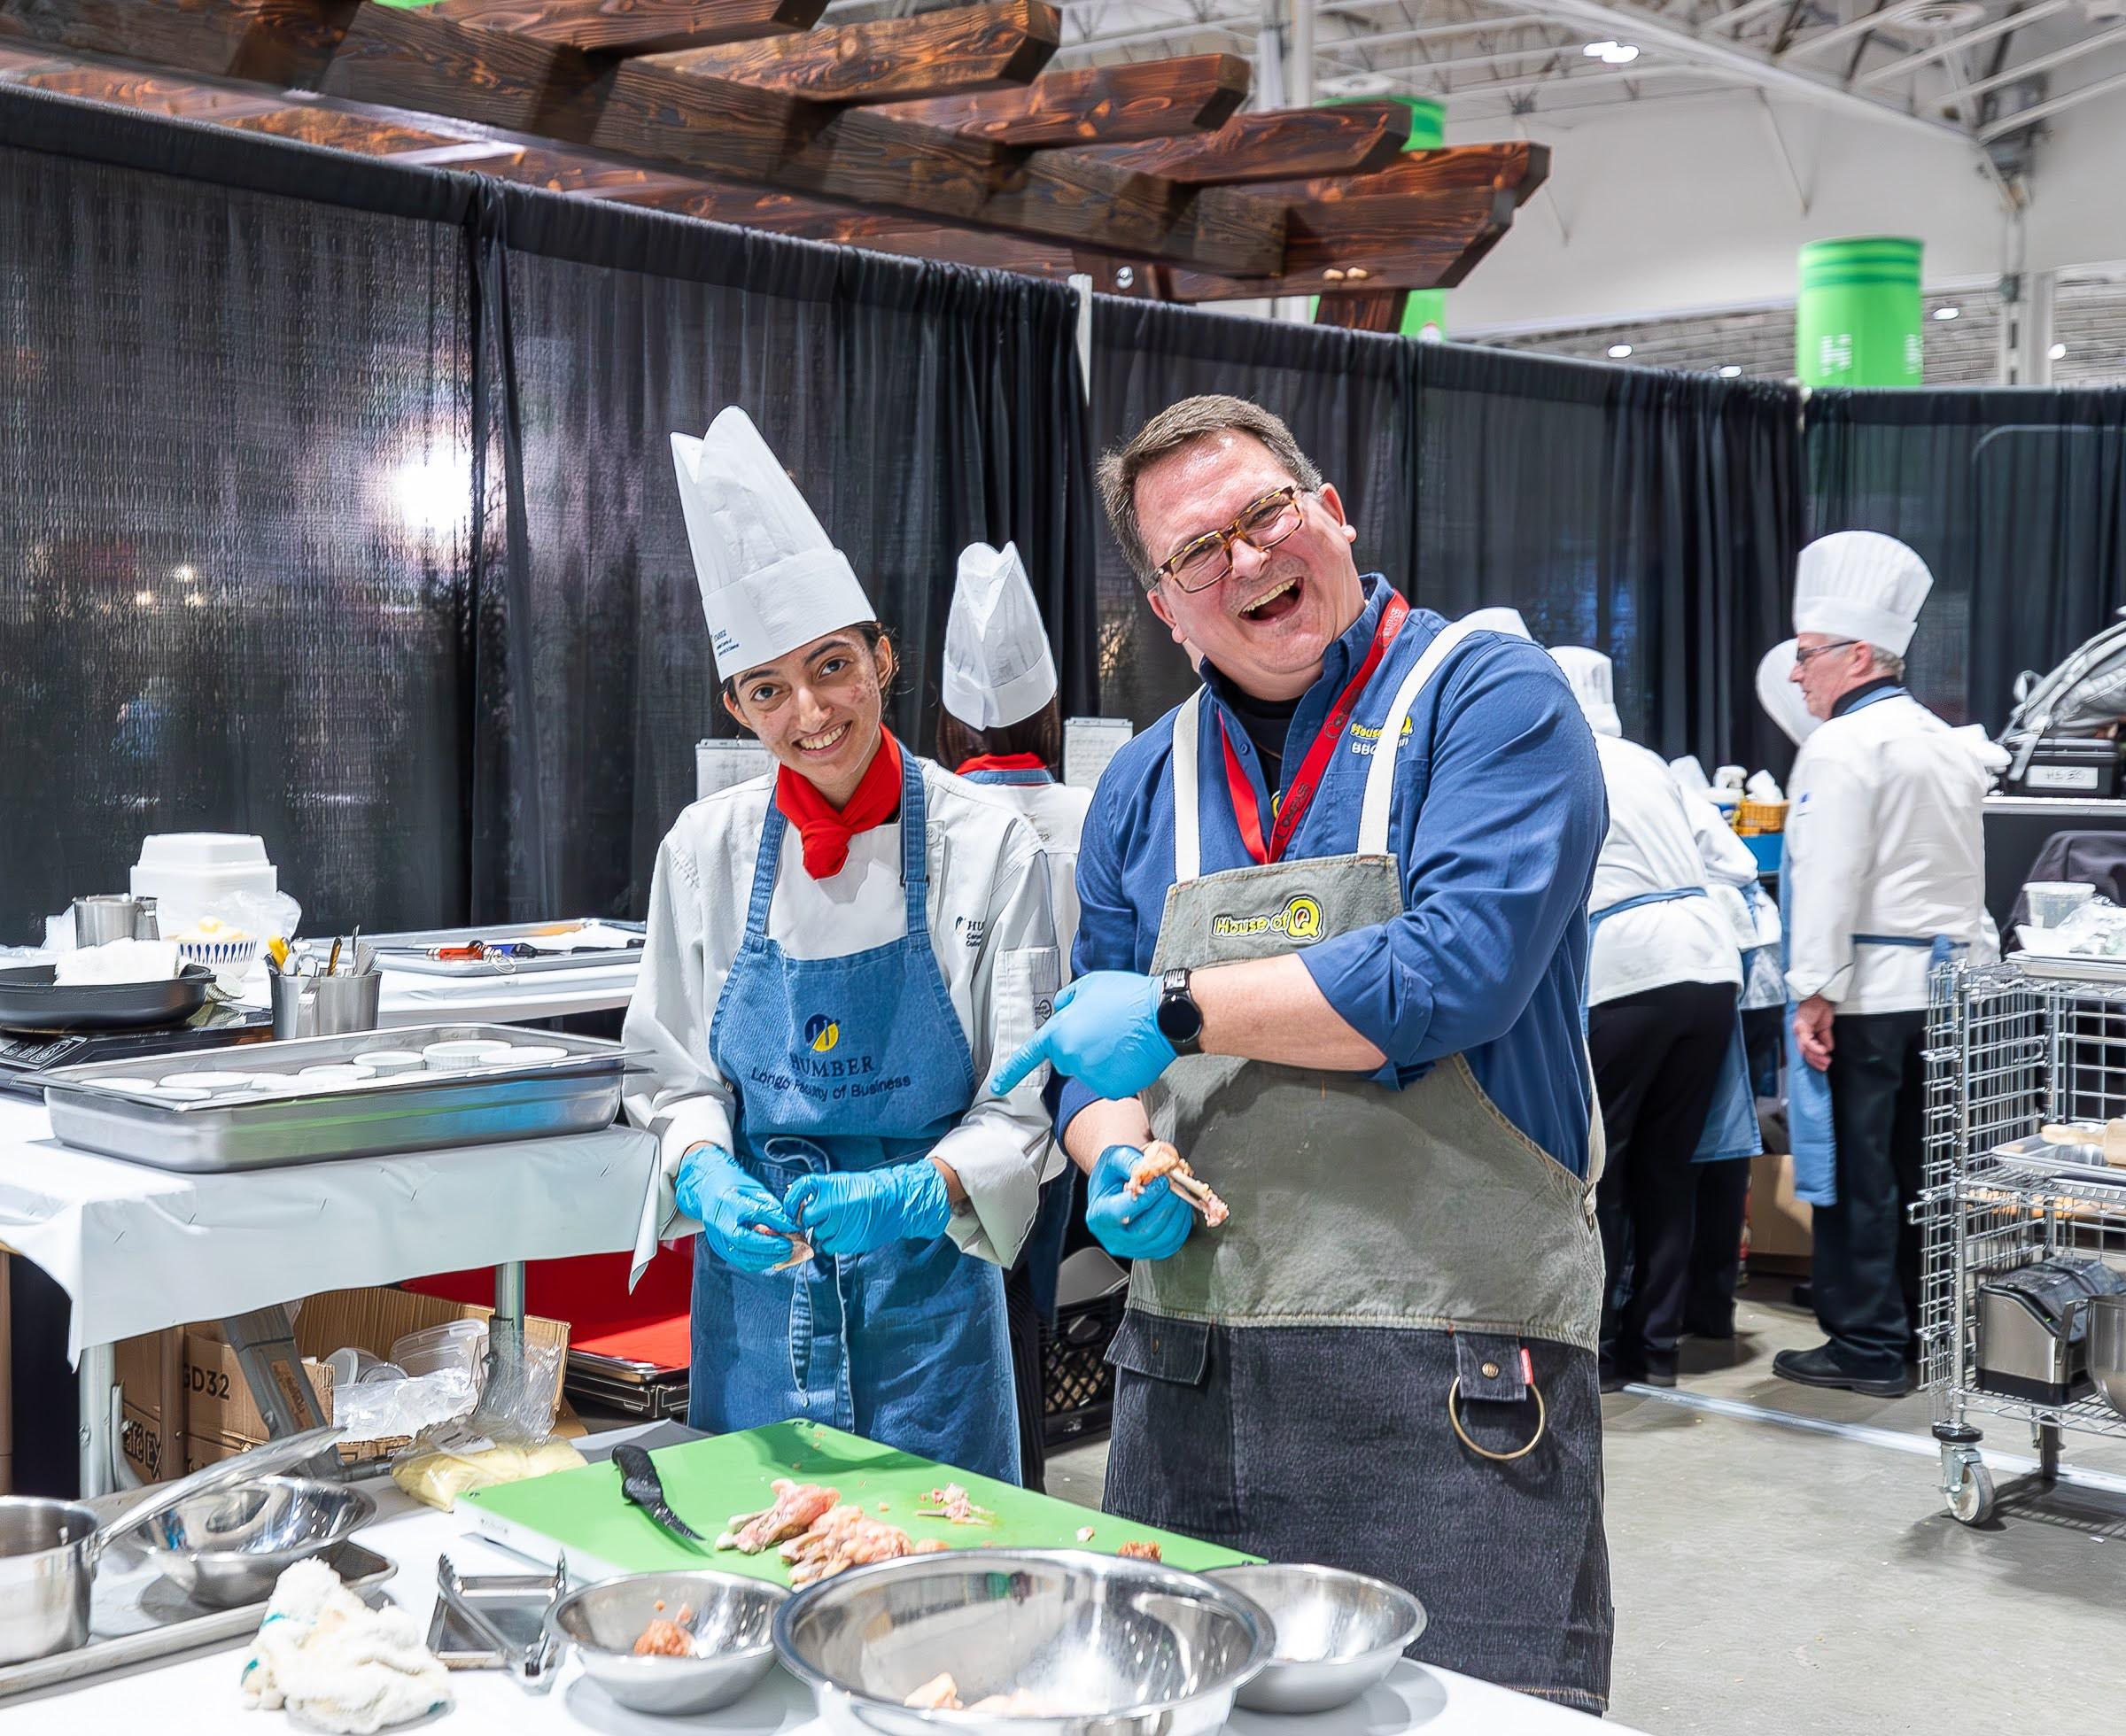 Two people prepare food to be cooked. One is wearing an apron with a Humber logo on it.